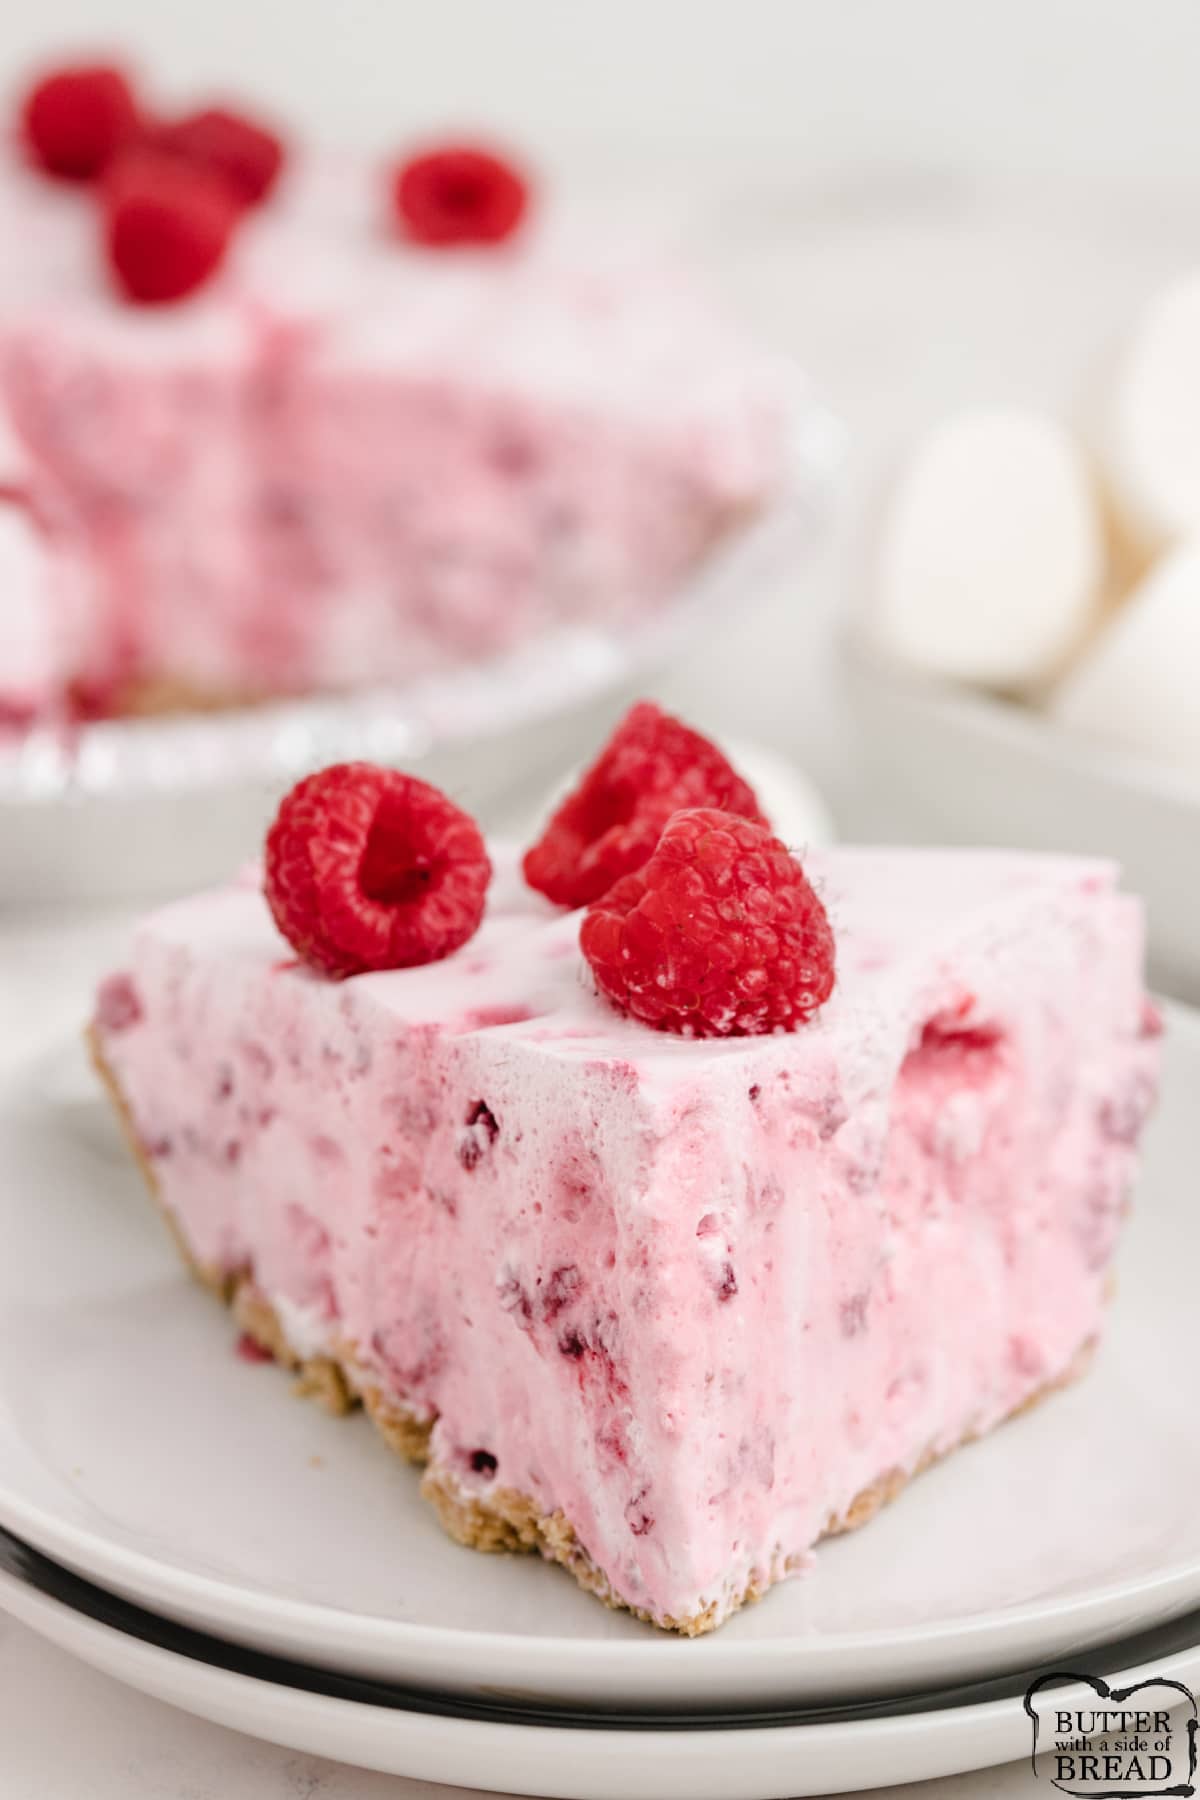 No bake pie made with raspberries and melted marshmallows